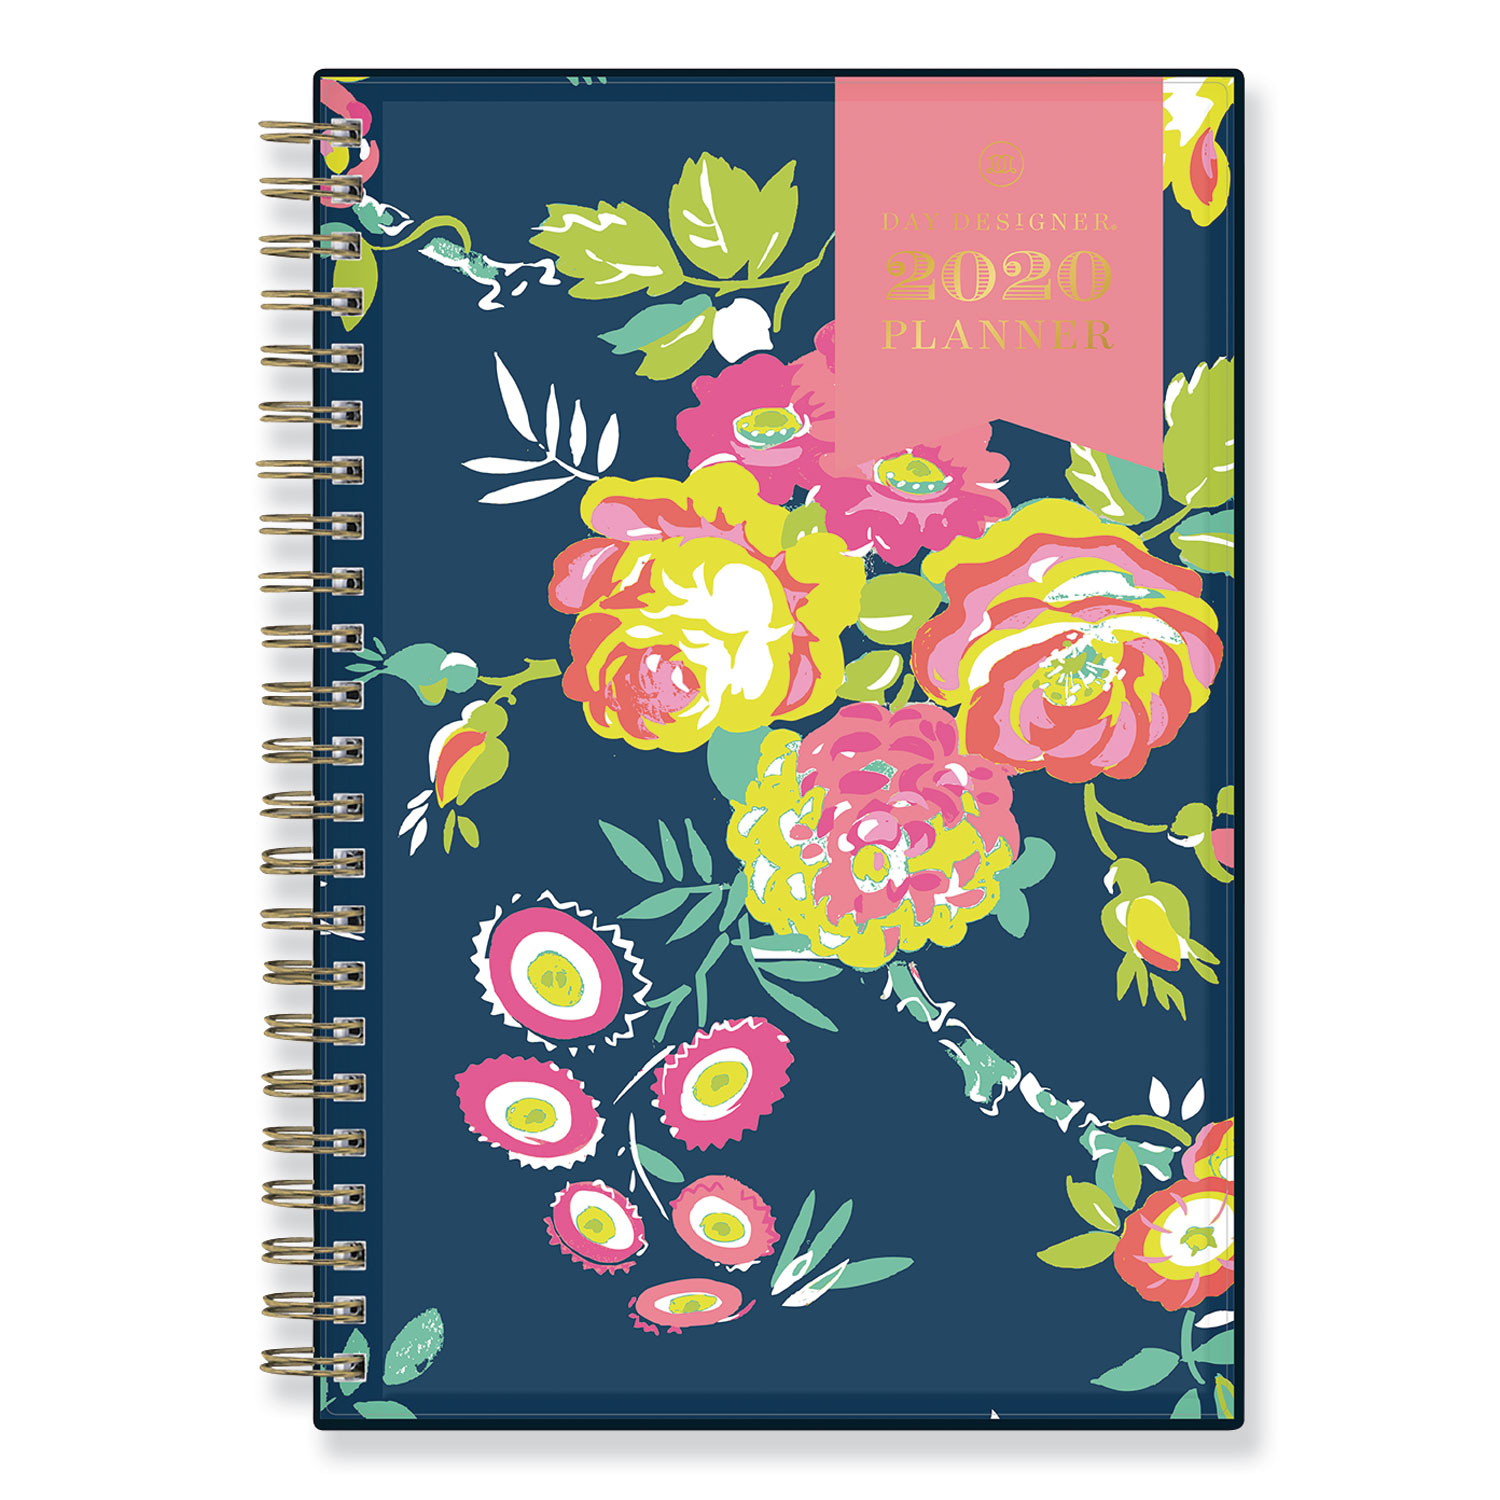 Day Designer CYO Weekly/Monthly Planner, 8 x 5, Navy/Floral, 2020